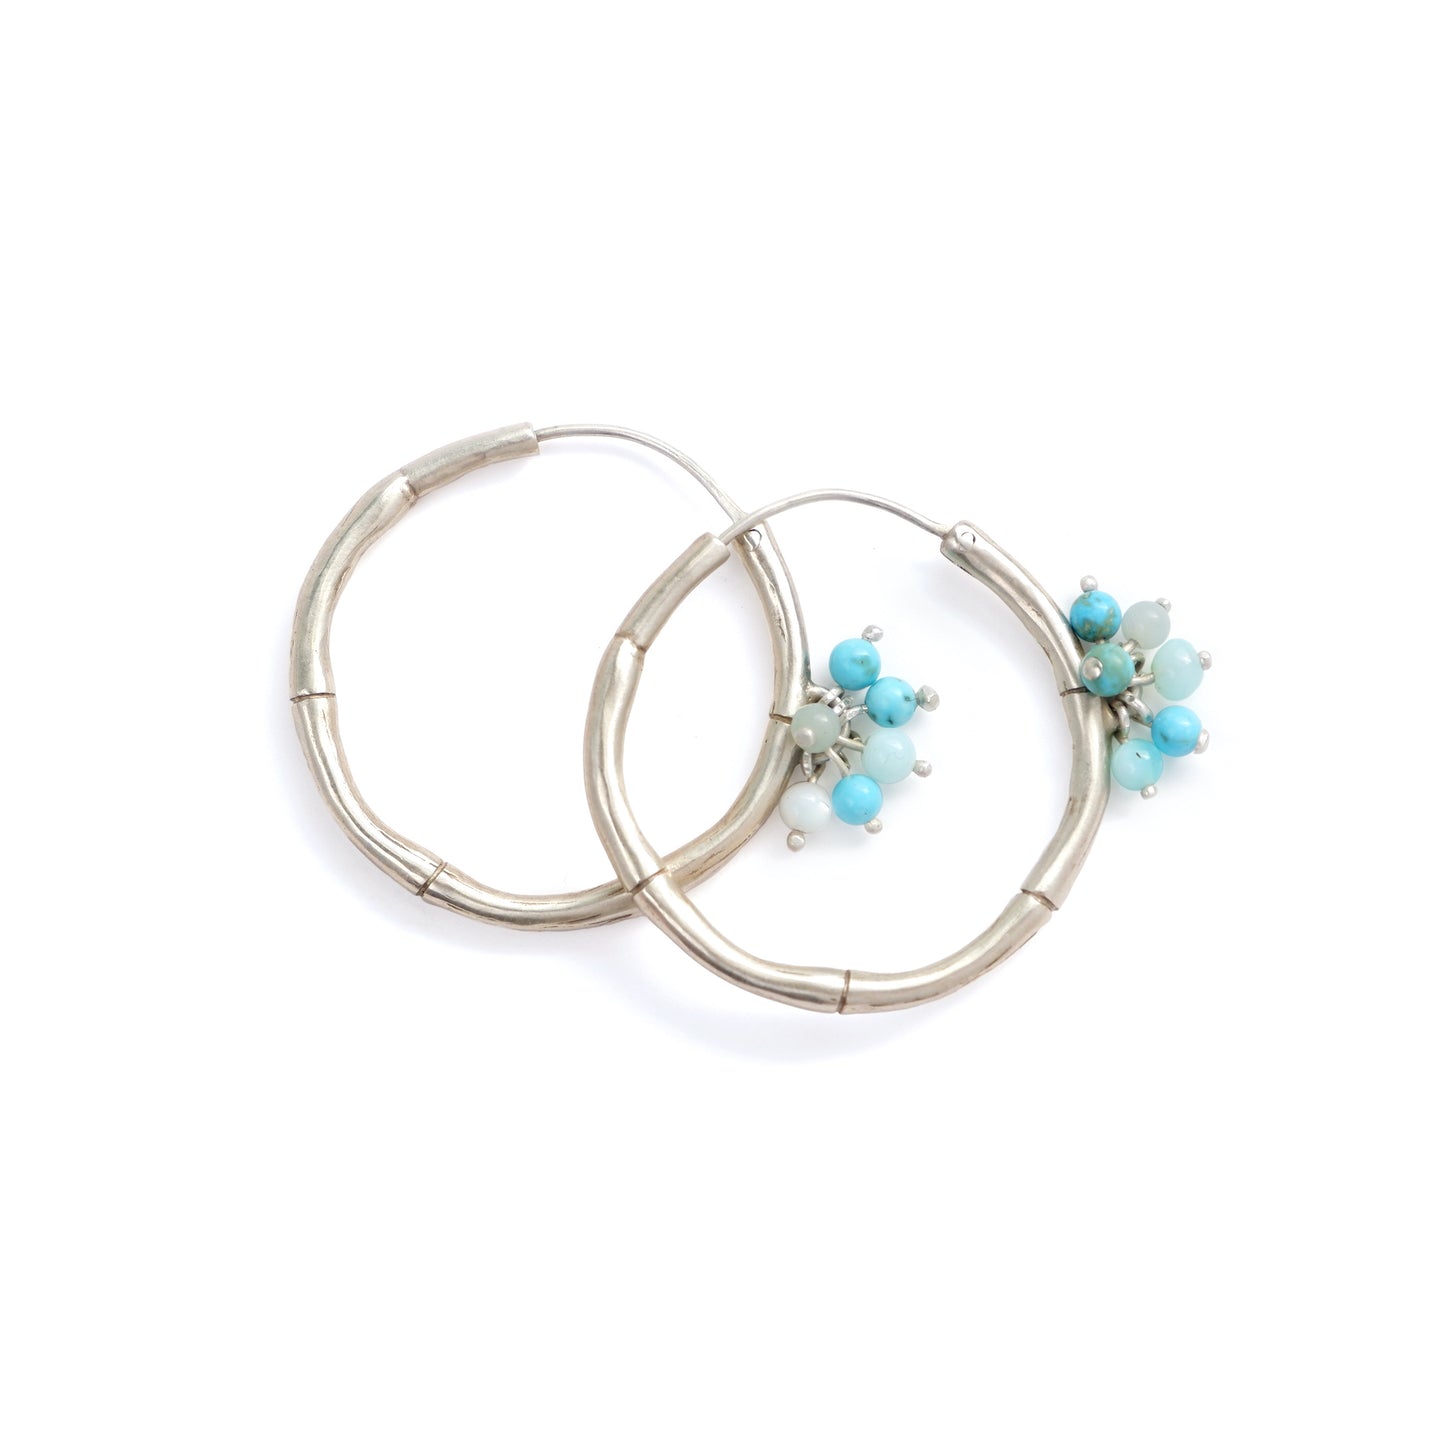 Sterling Silver Bamboo Hoops small size, turquoise blue gemstone Bauble beads